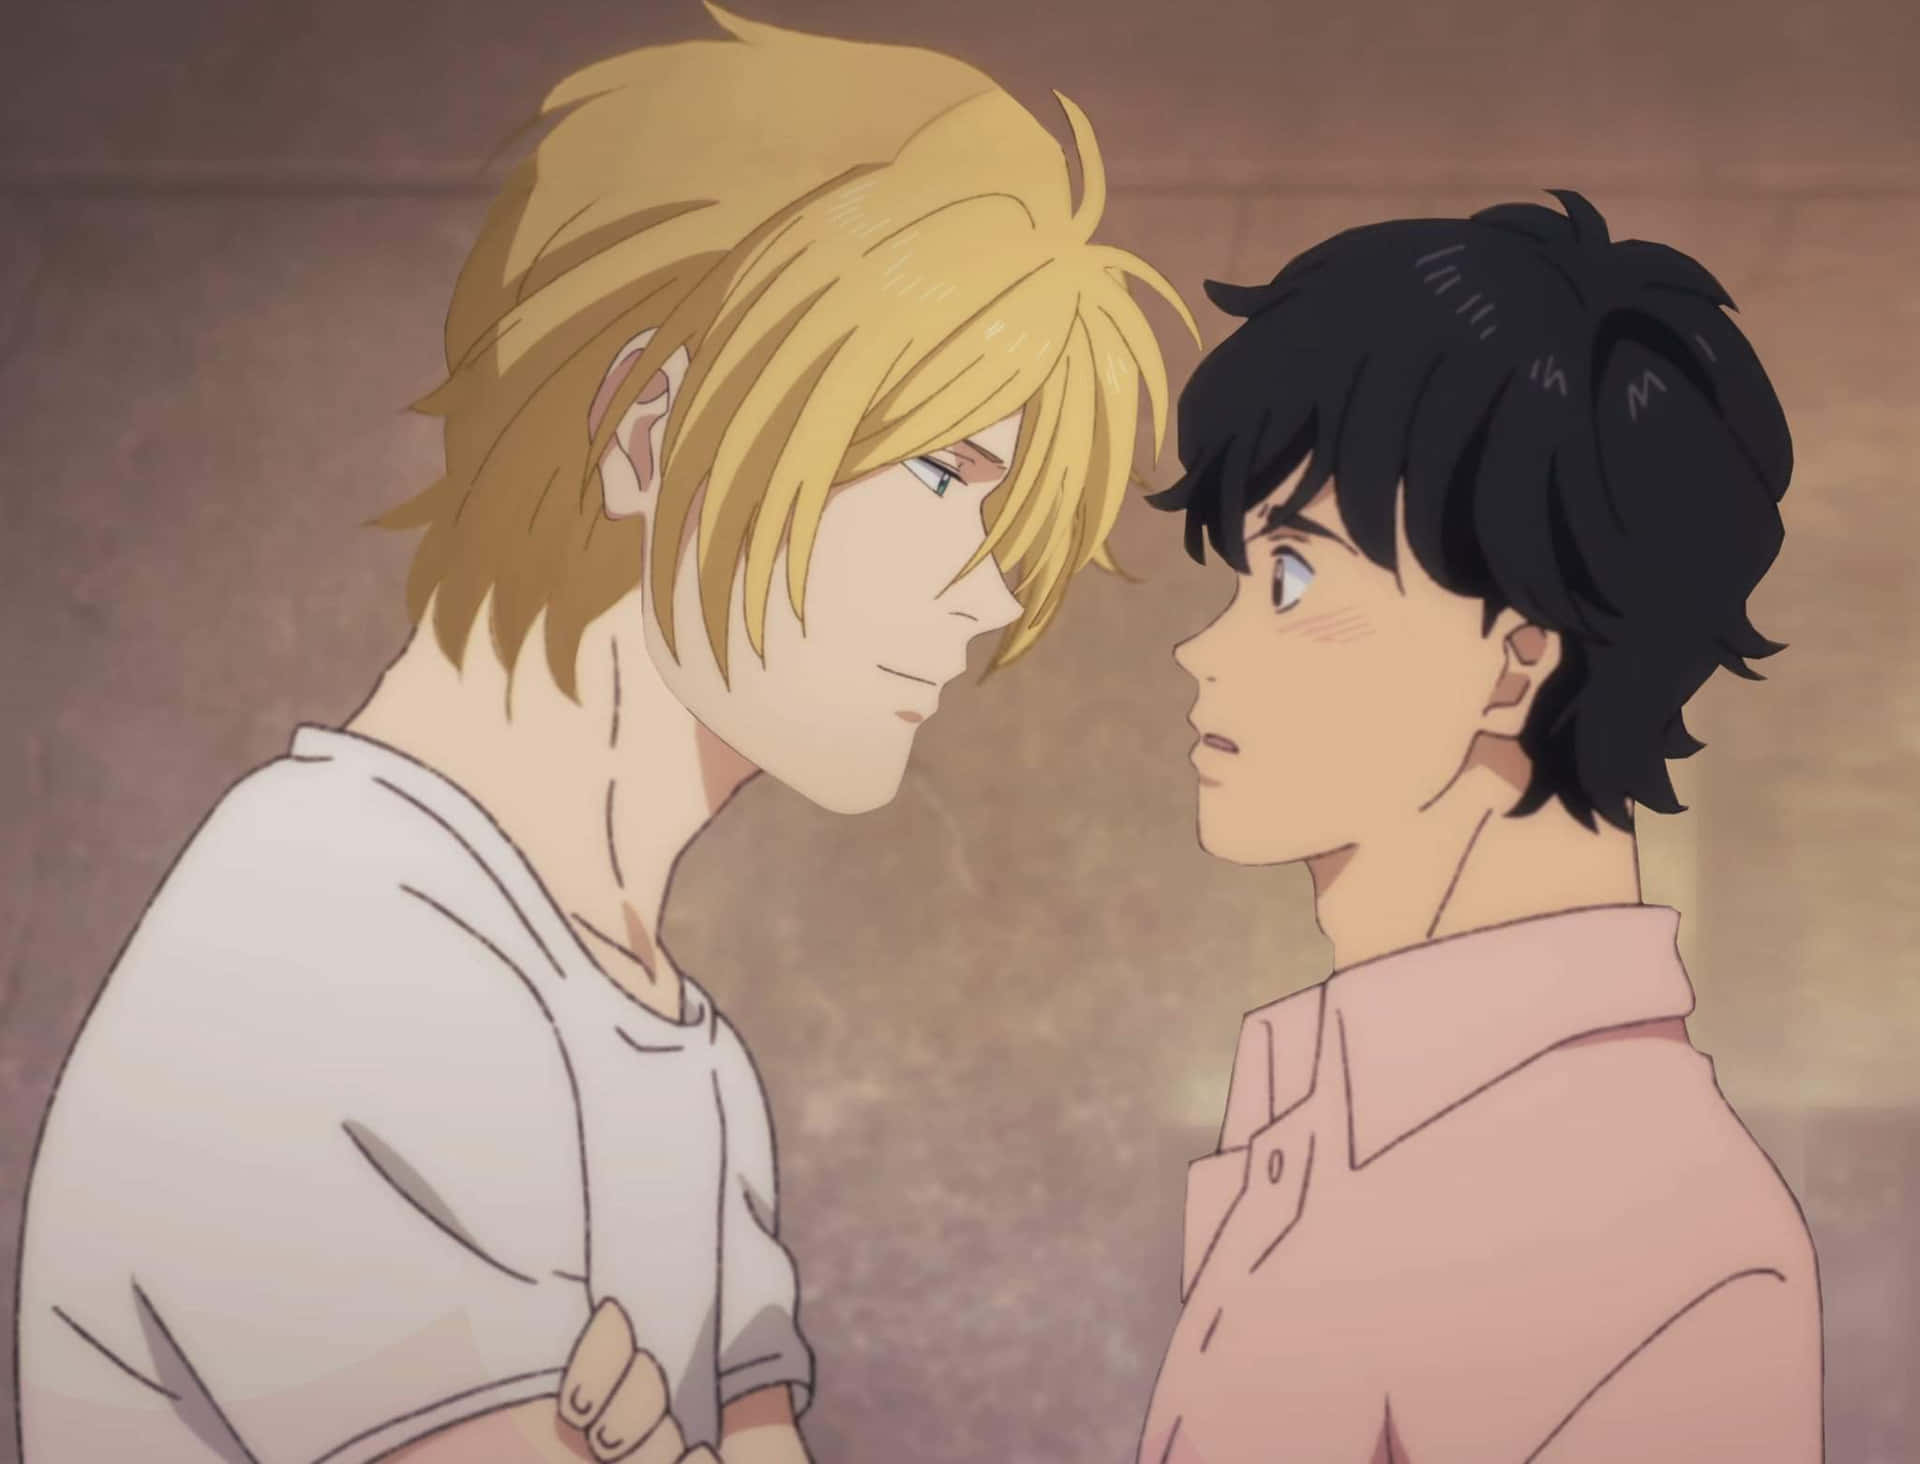 Download “Join Ash Lynx and Eiji Okumura on their journey to uncover the  mysterious drug, Banana Fish, in the new anime series!”